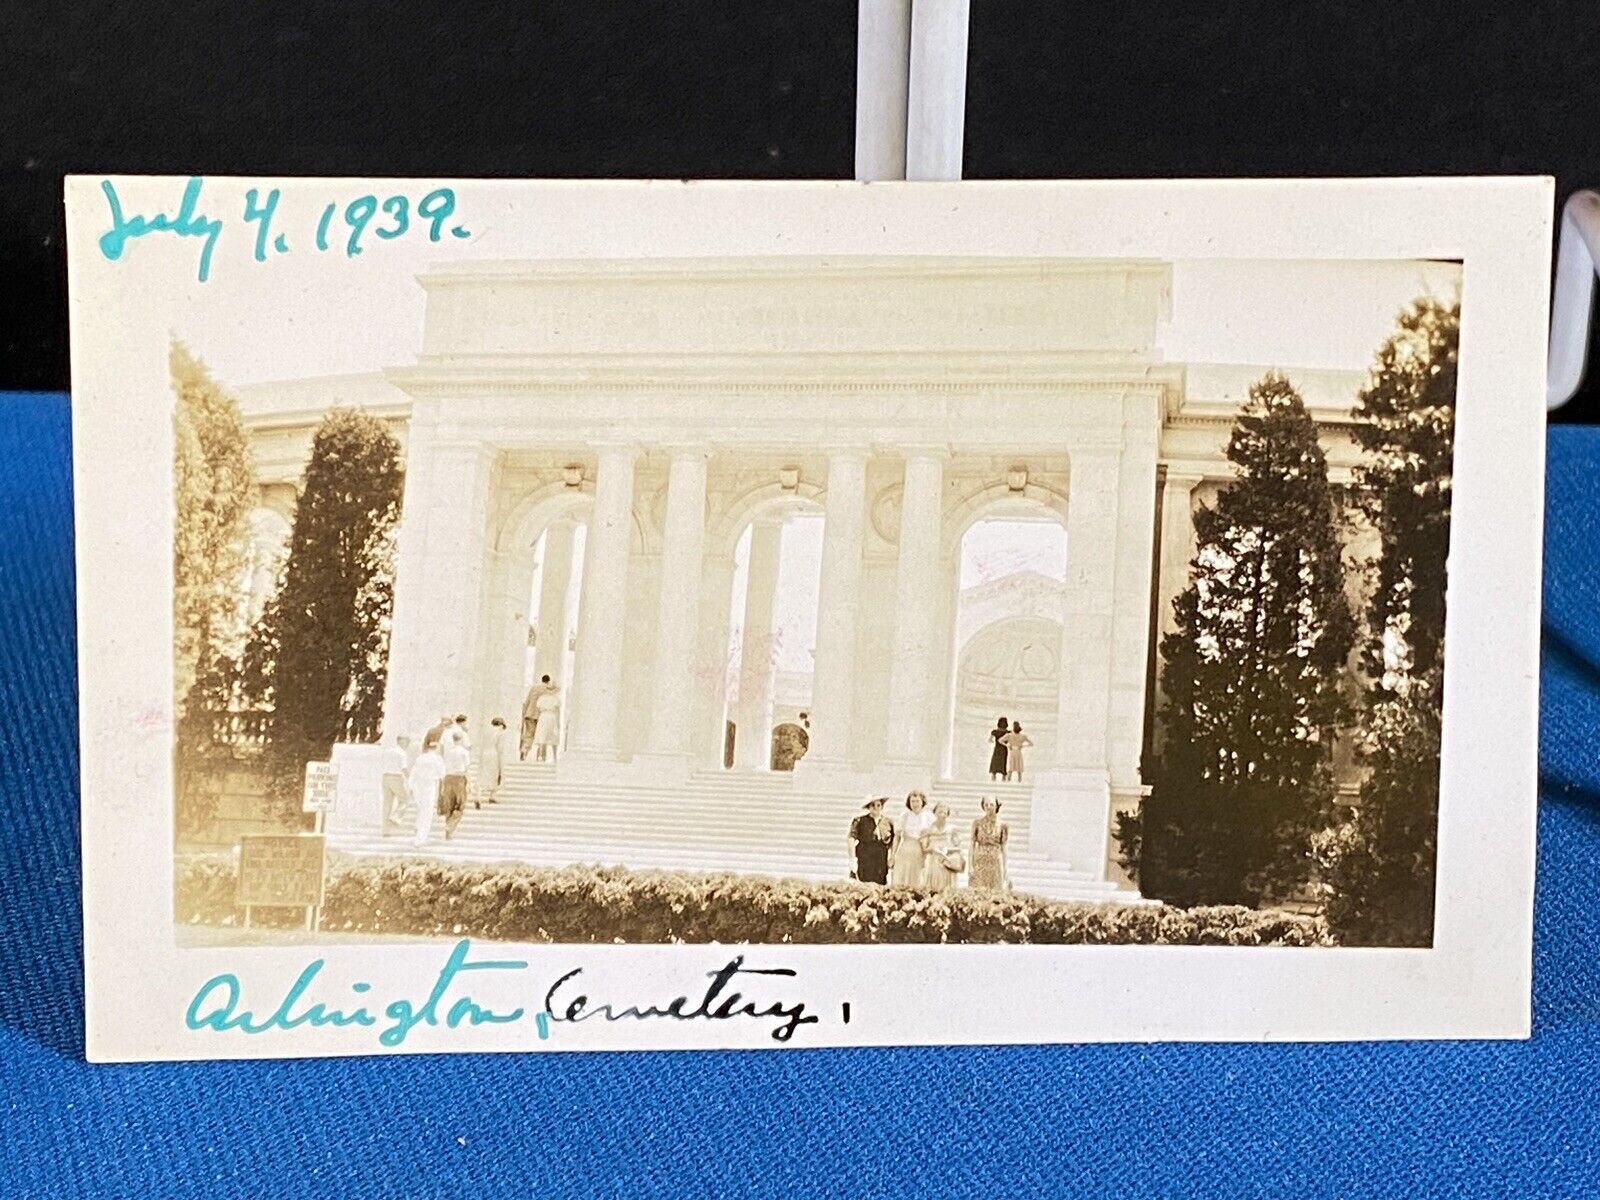 July 4th 1939 Independence Day Arlington Cemetery Vintage Photo